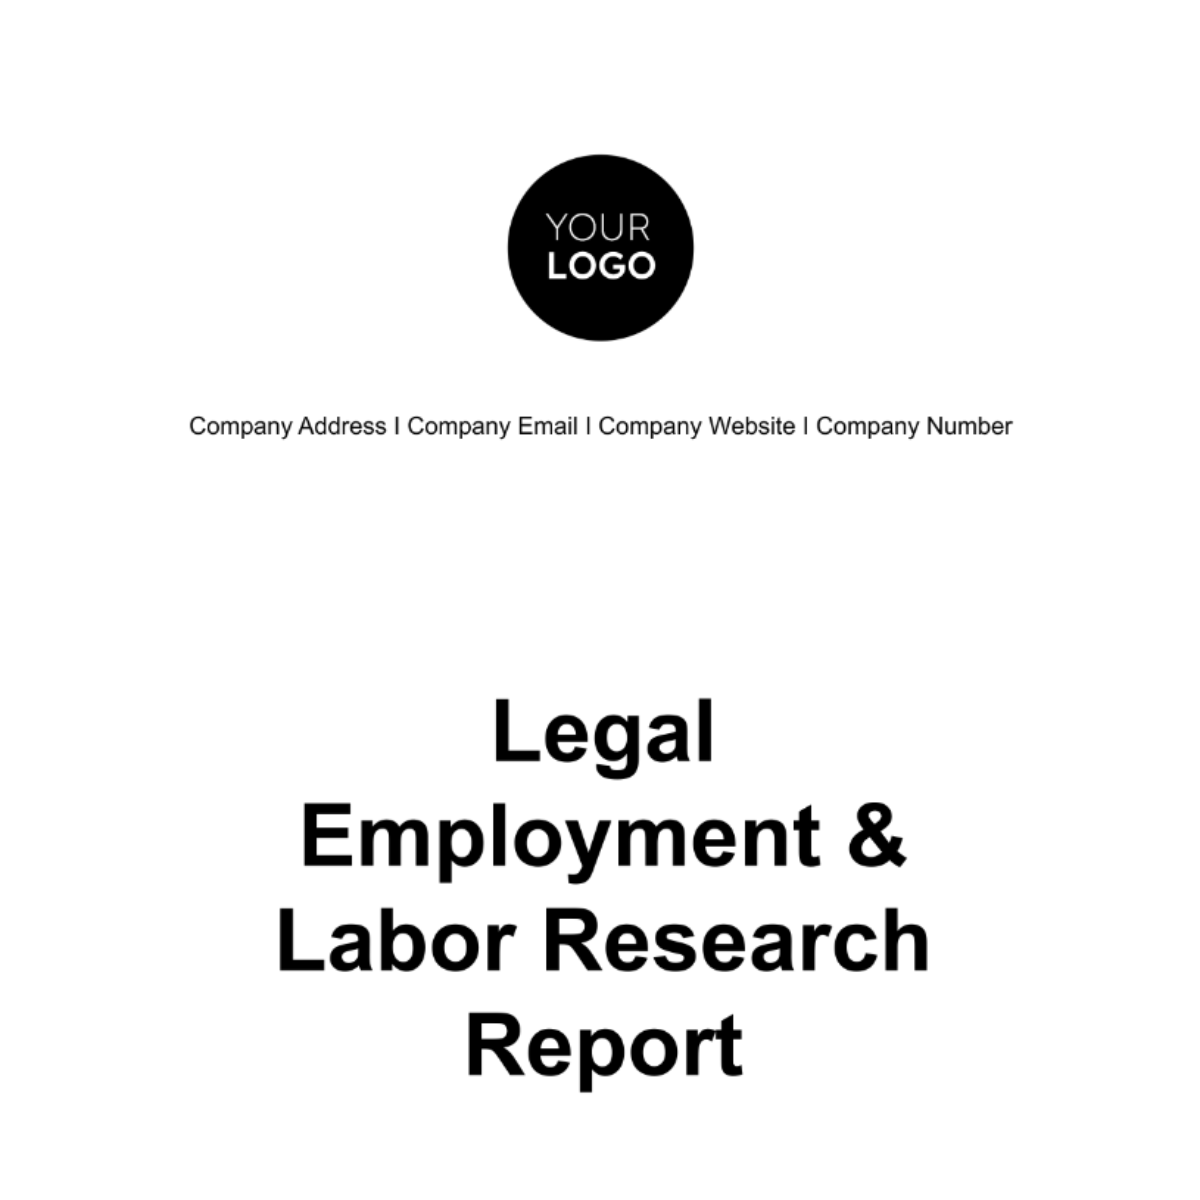 Free Legal Employment & Labor Research Report Template